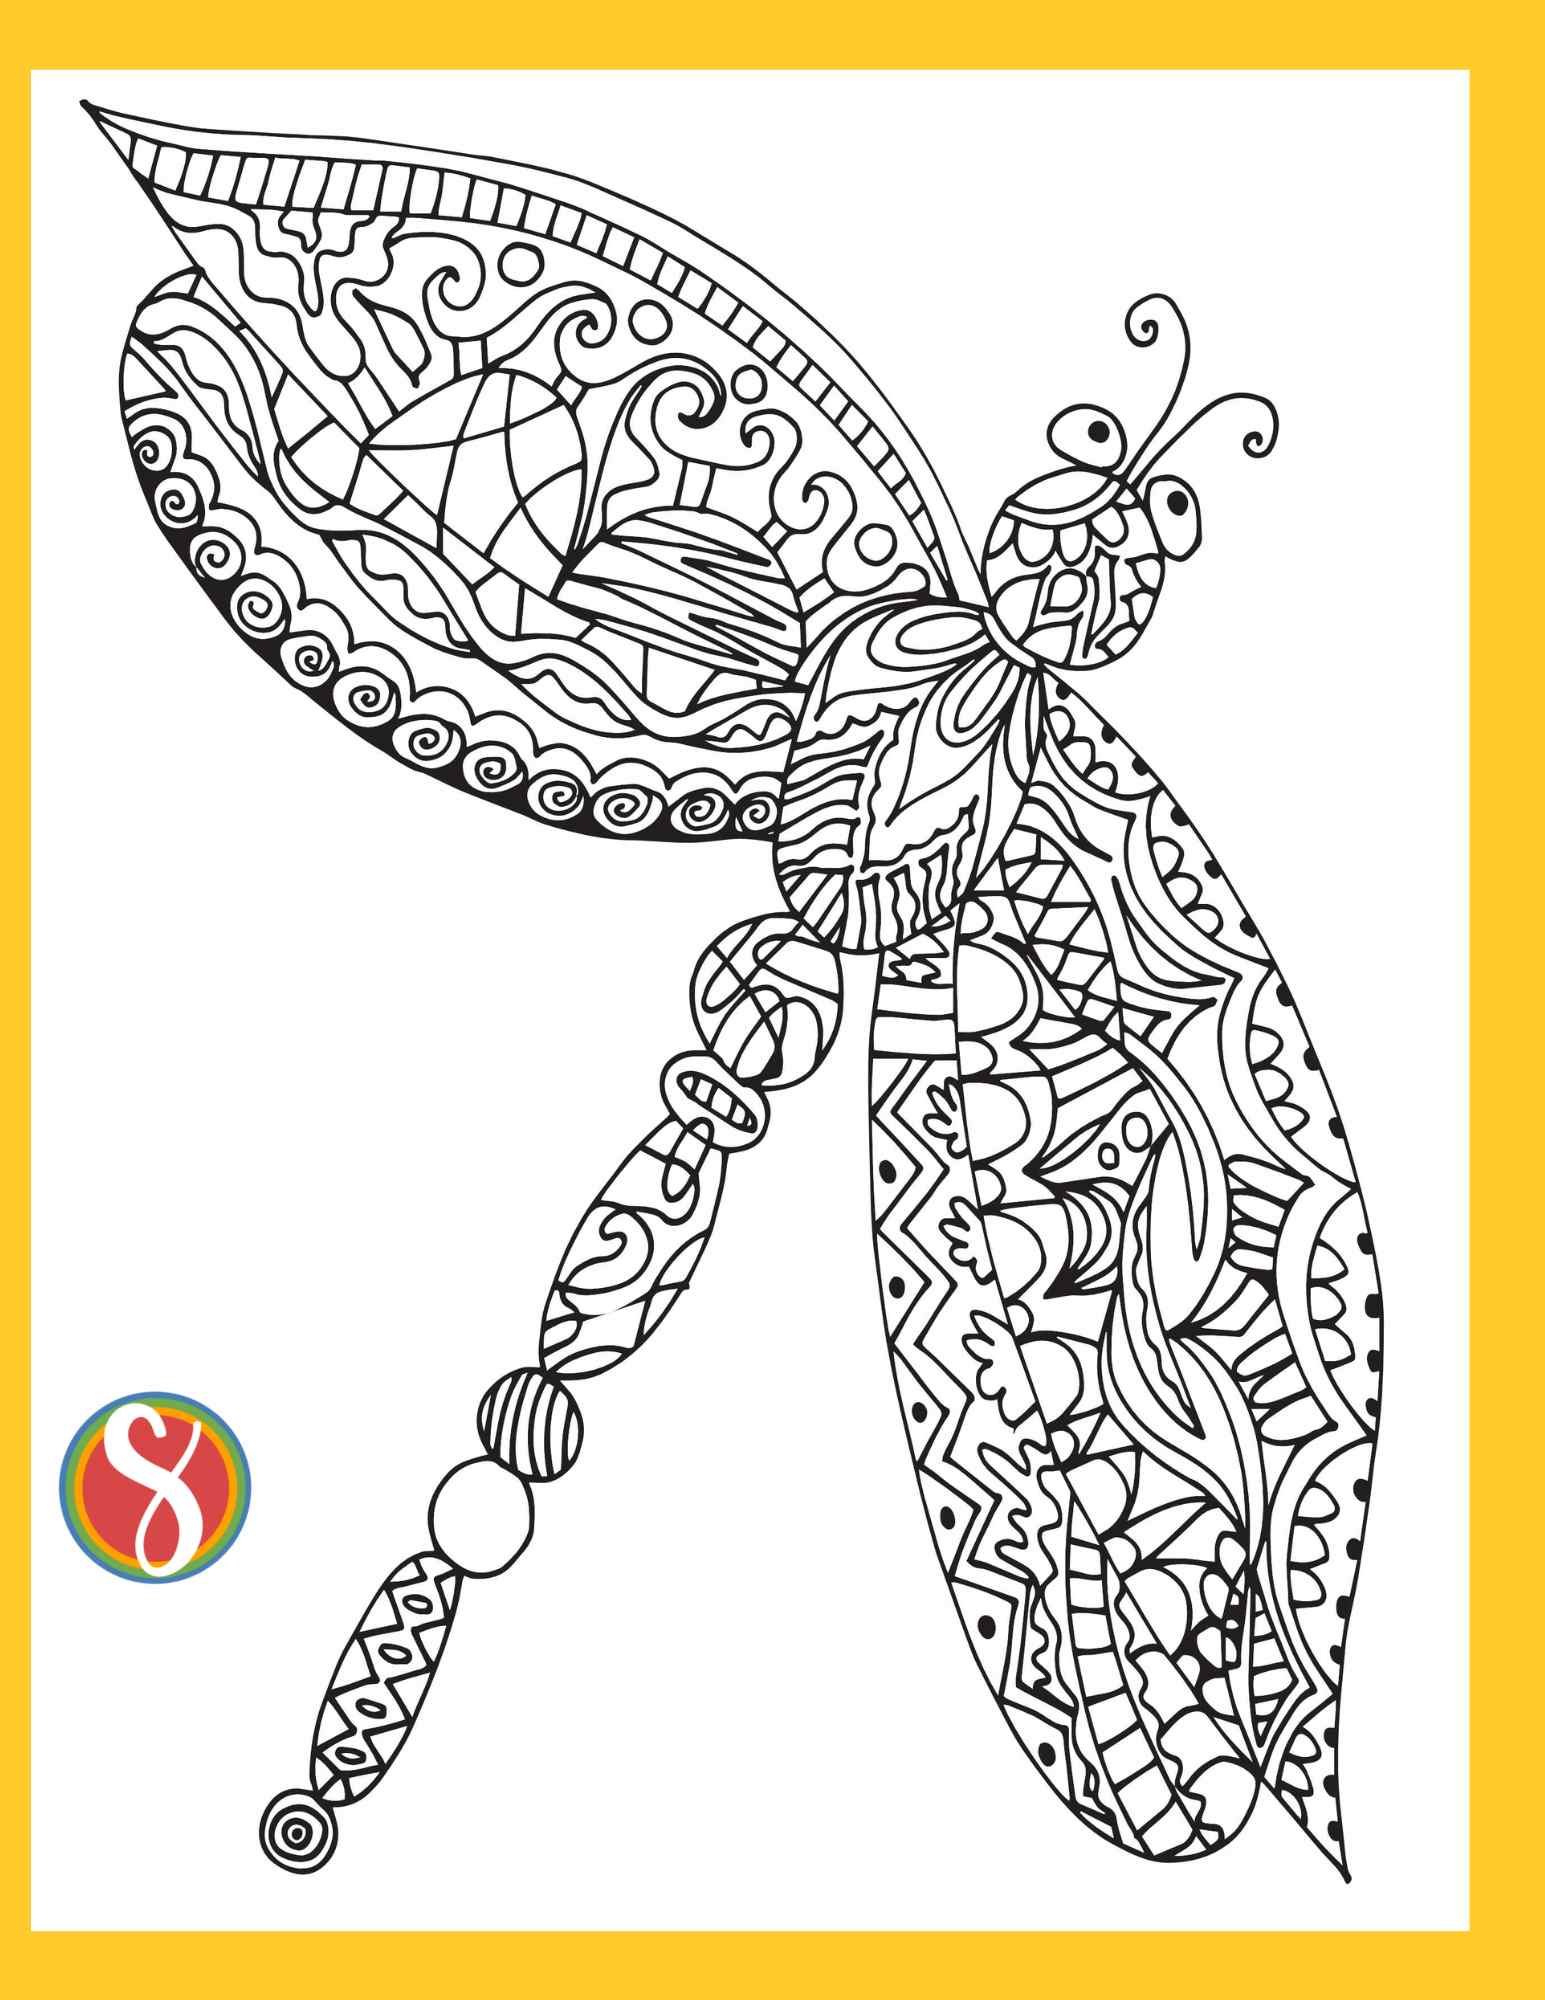 adult dragonfly coloring page, dragonfly outline, lots of doodles inside to color